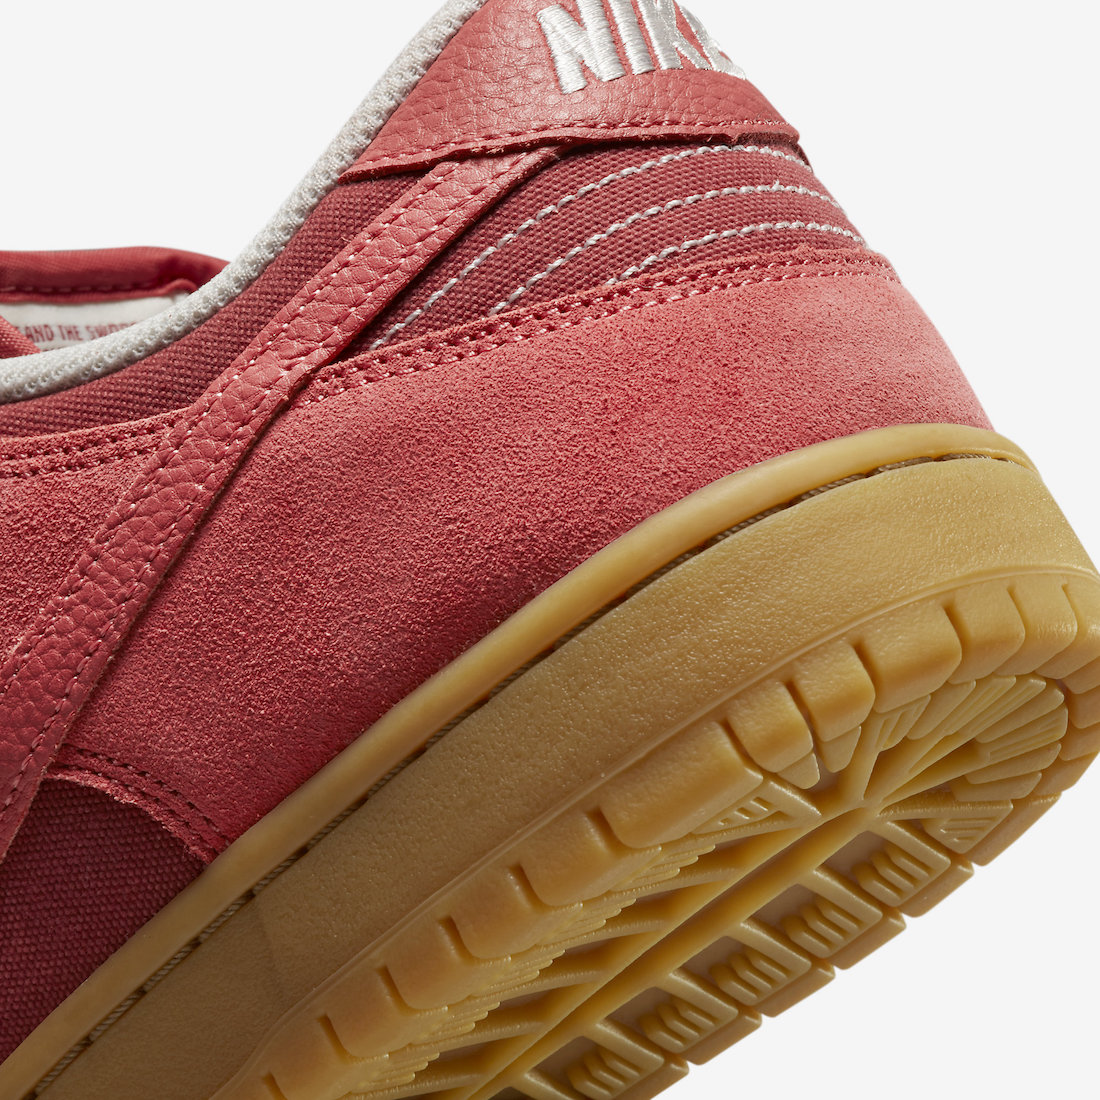 Nike SB Dunk Low Red Gum DV5429 600 Release Date 7